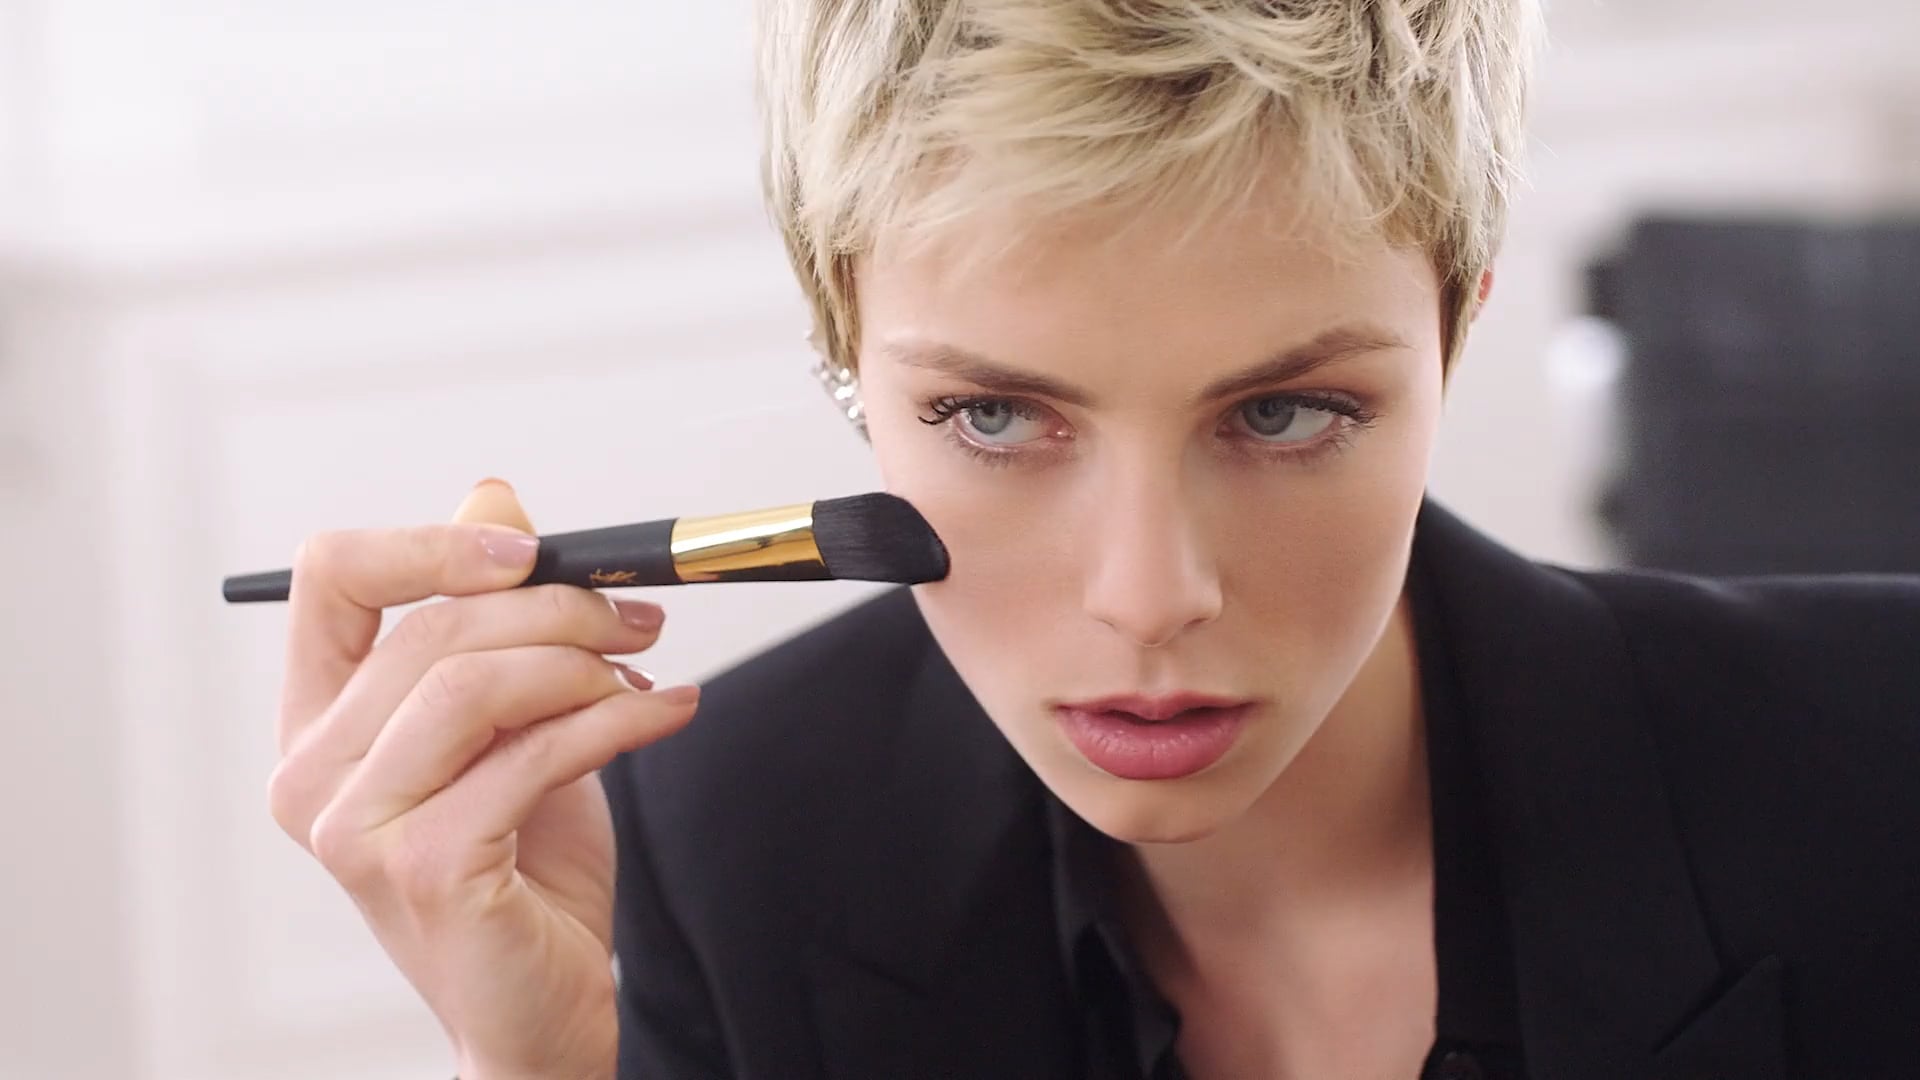 YSL BEAUTY // EDIE CAMPBELL